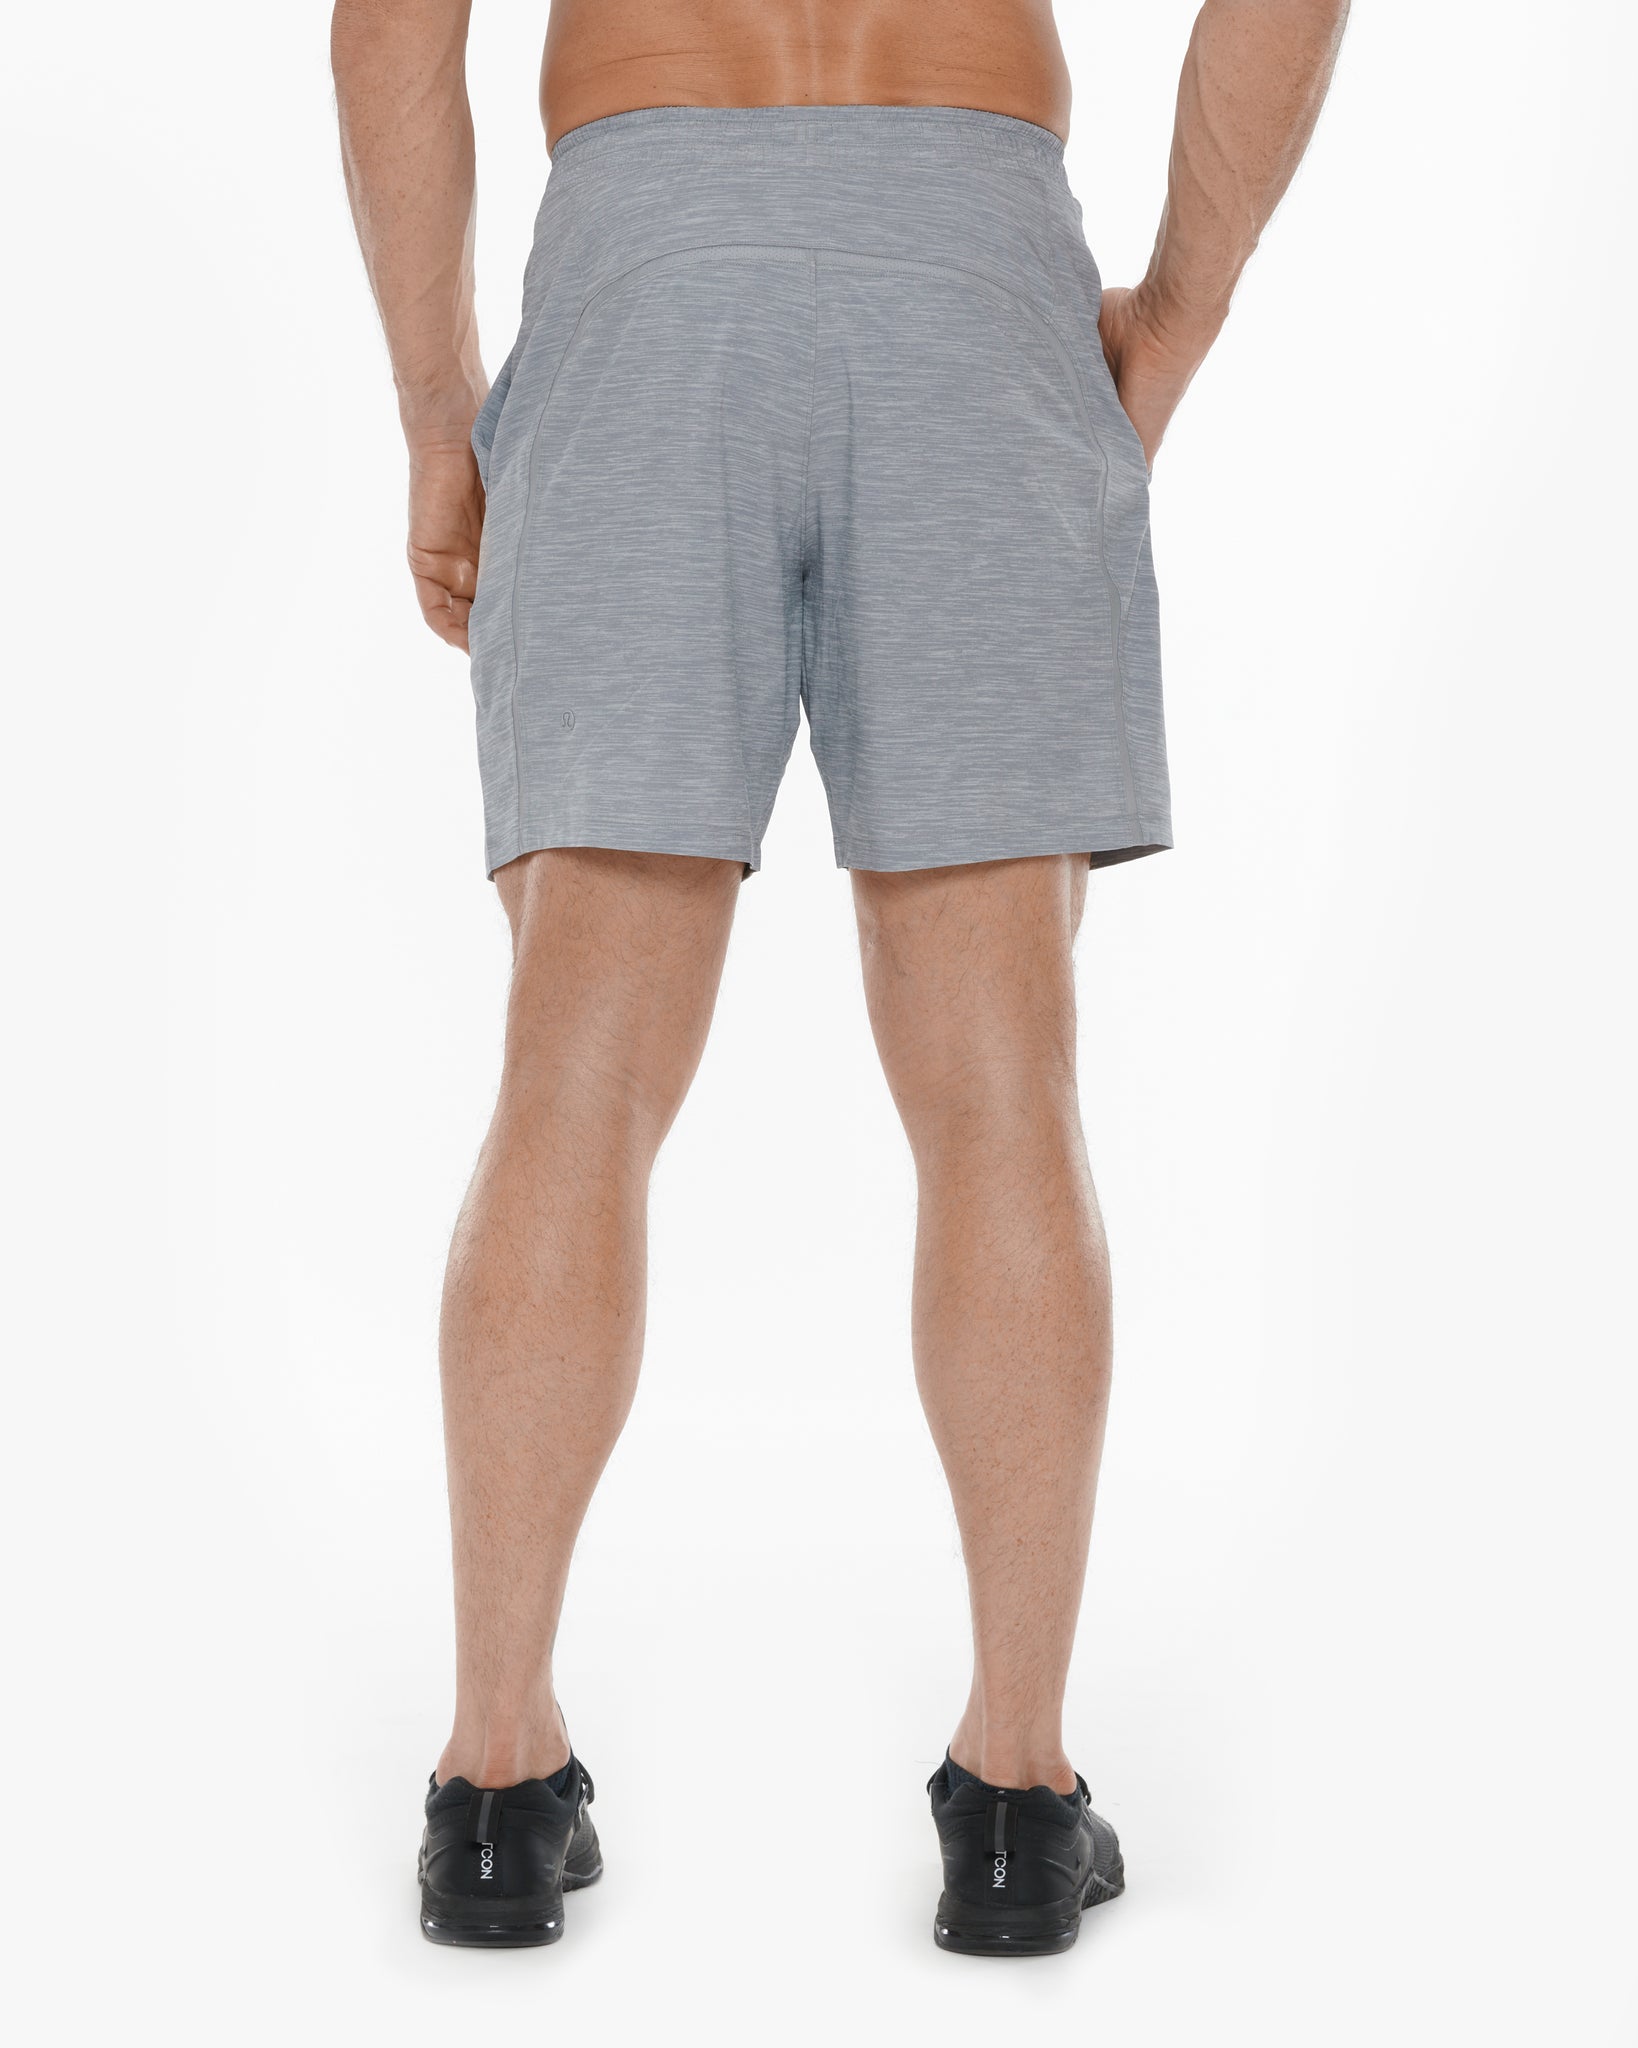 pace breaker lined short reviewed